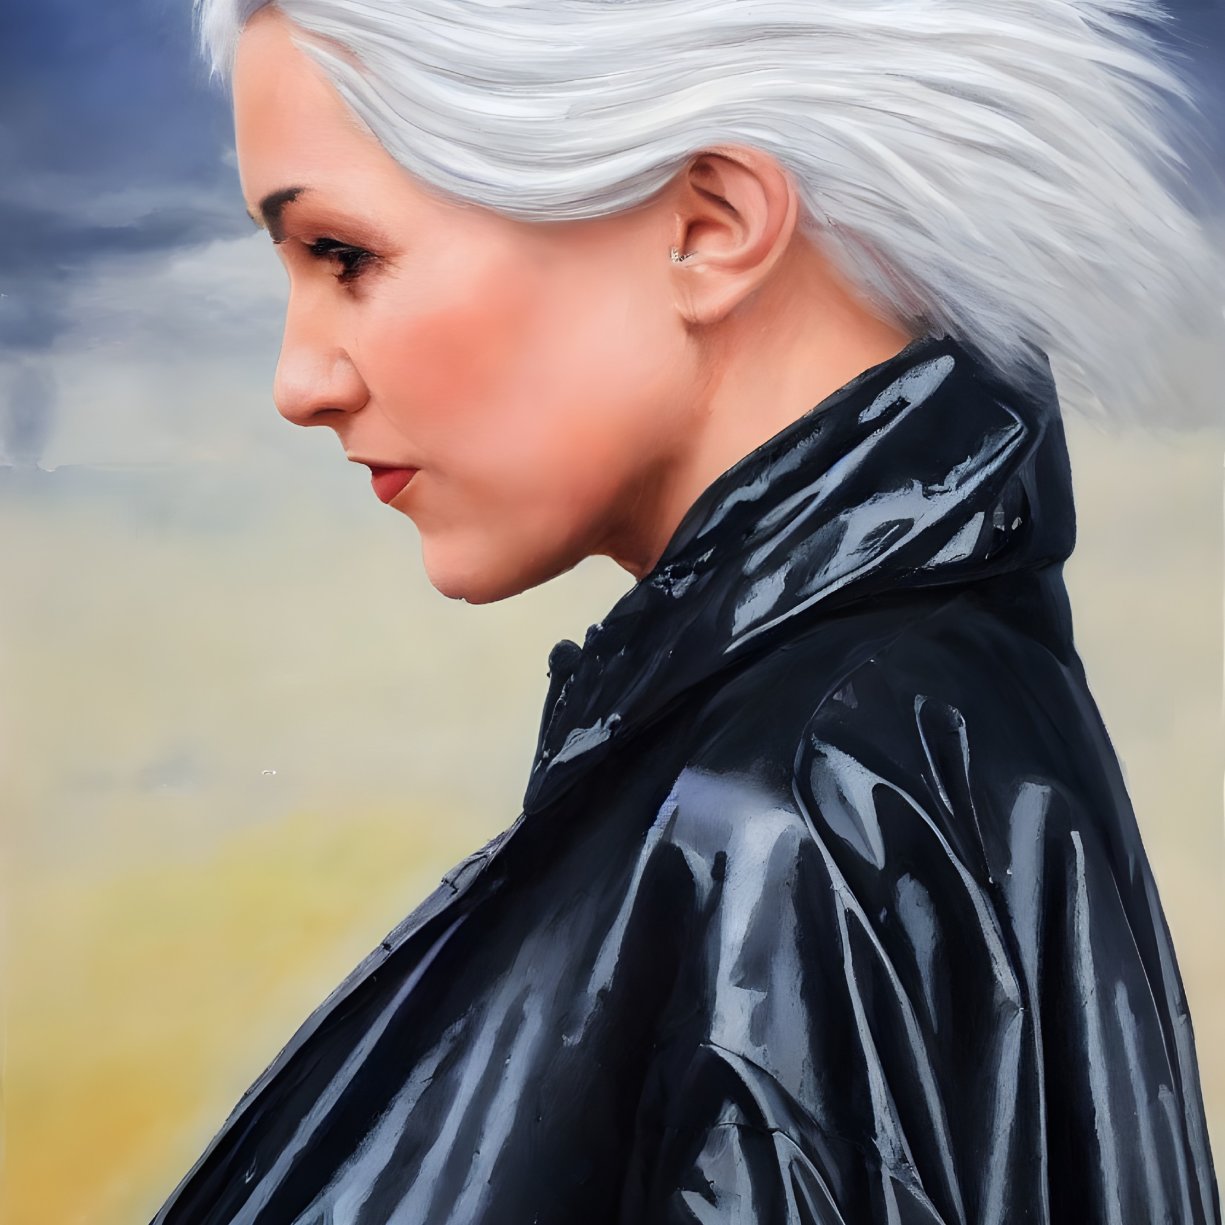 Silver-Haired Woman in Black Jacket Against Yellow-Tinted Sky